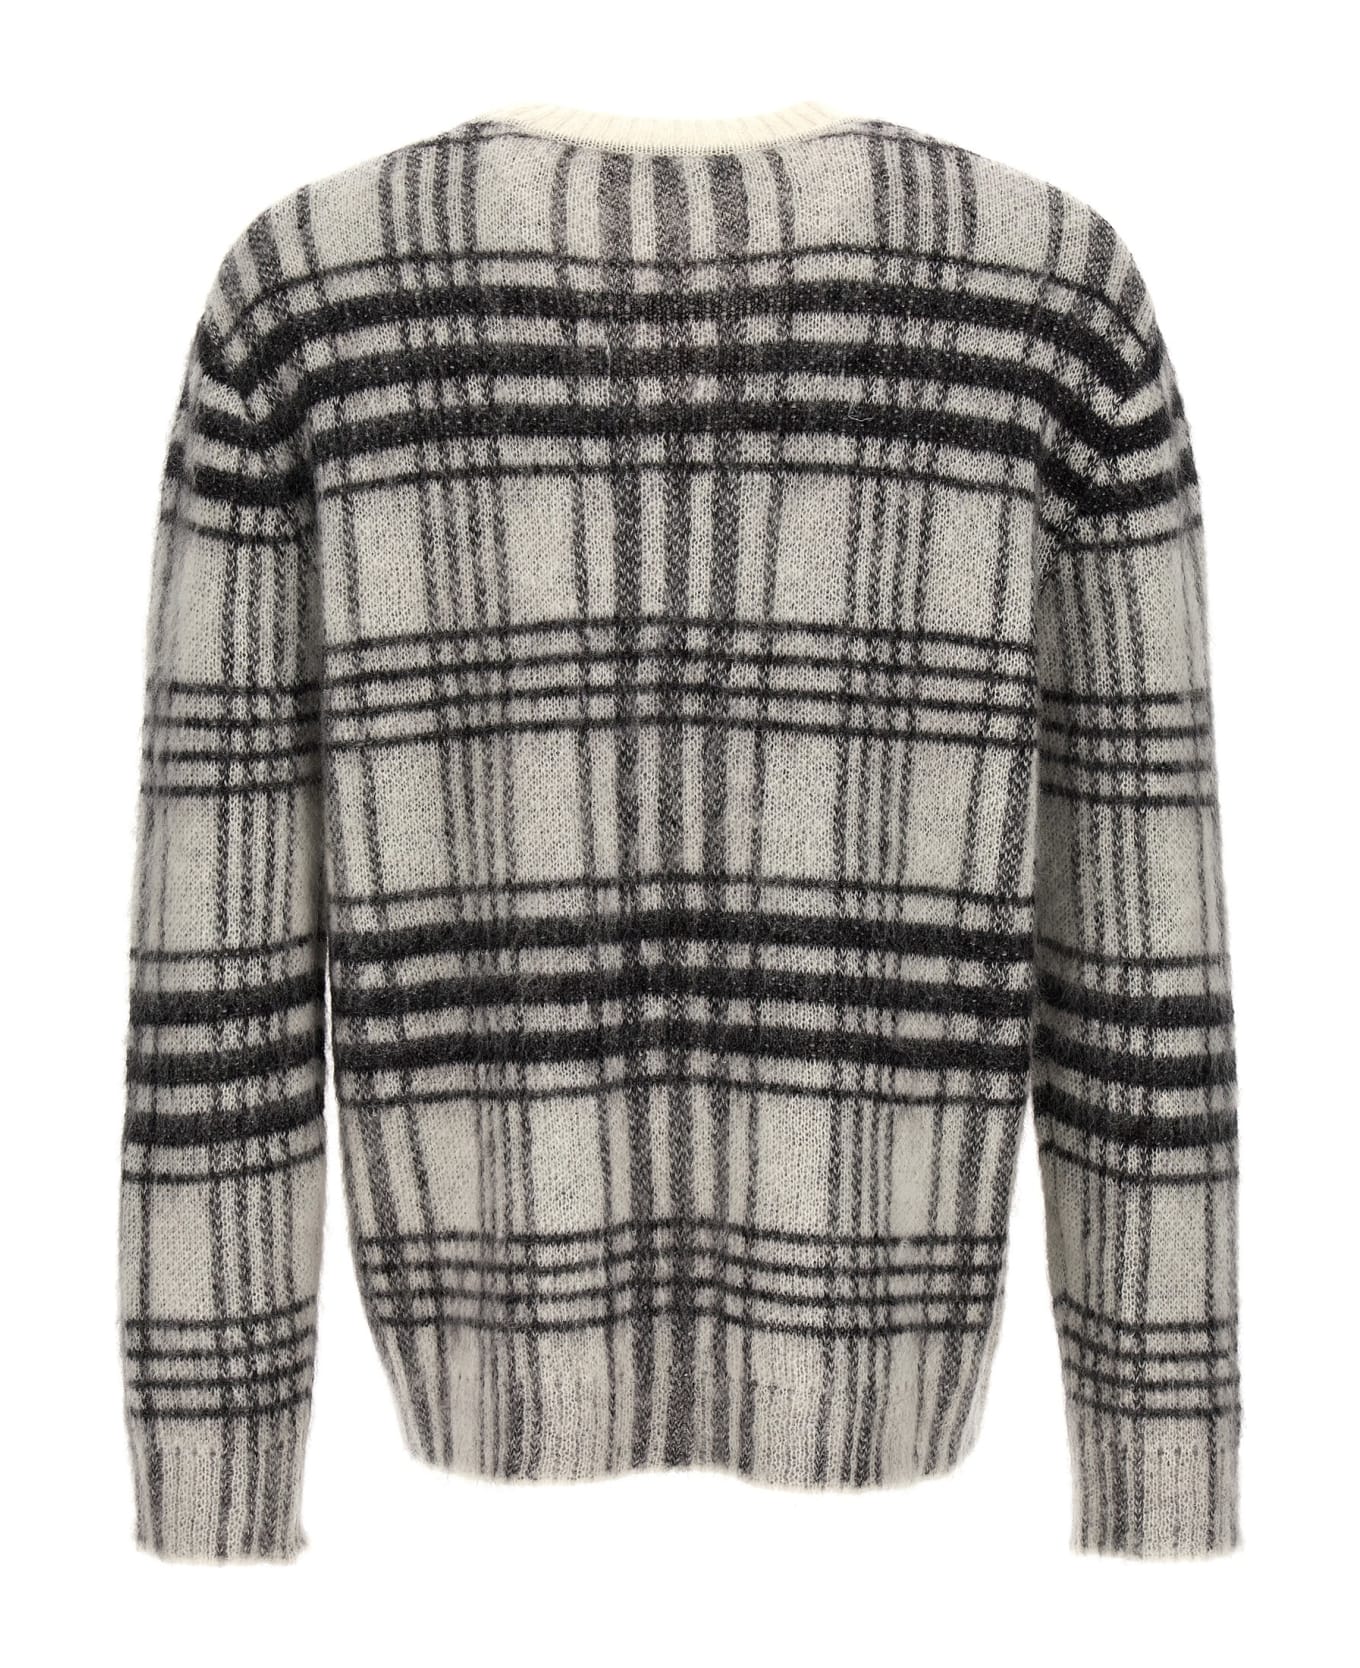 J.W. Anderson Logo Embroidery Check Sweater - White/Black ニットウェア